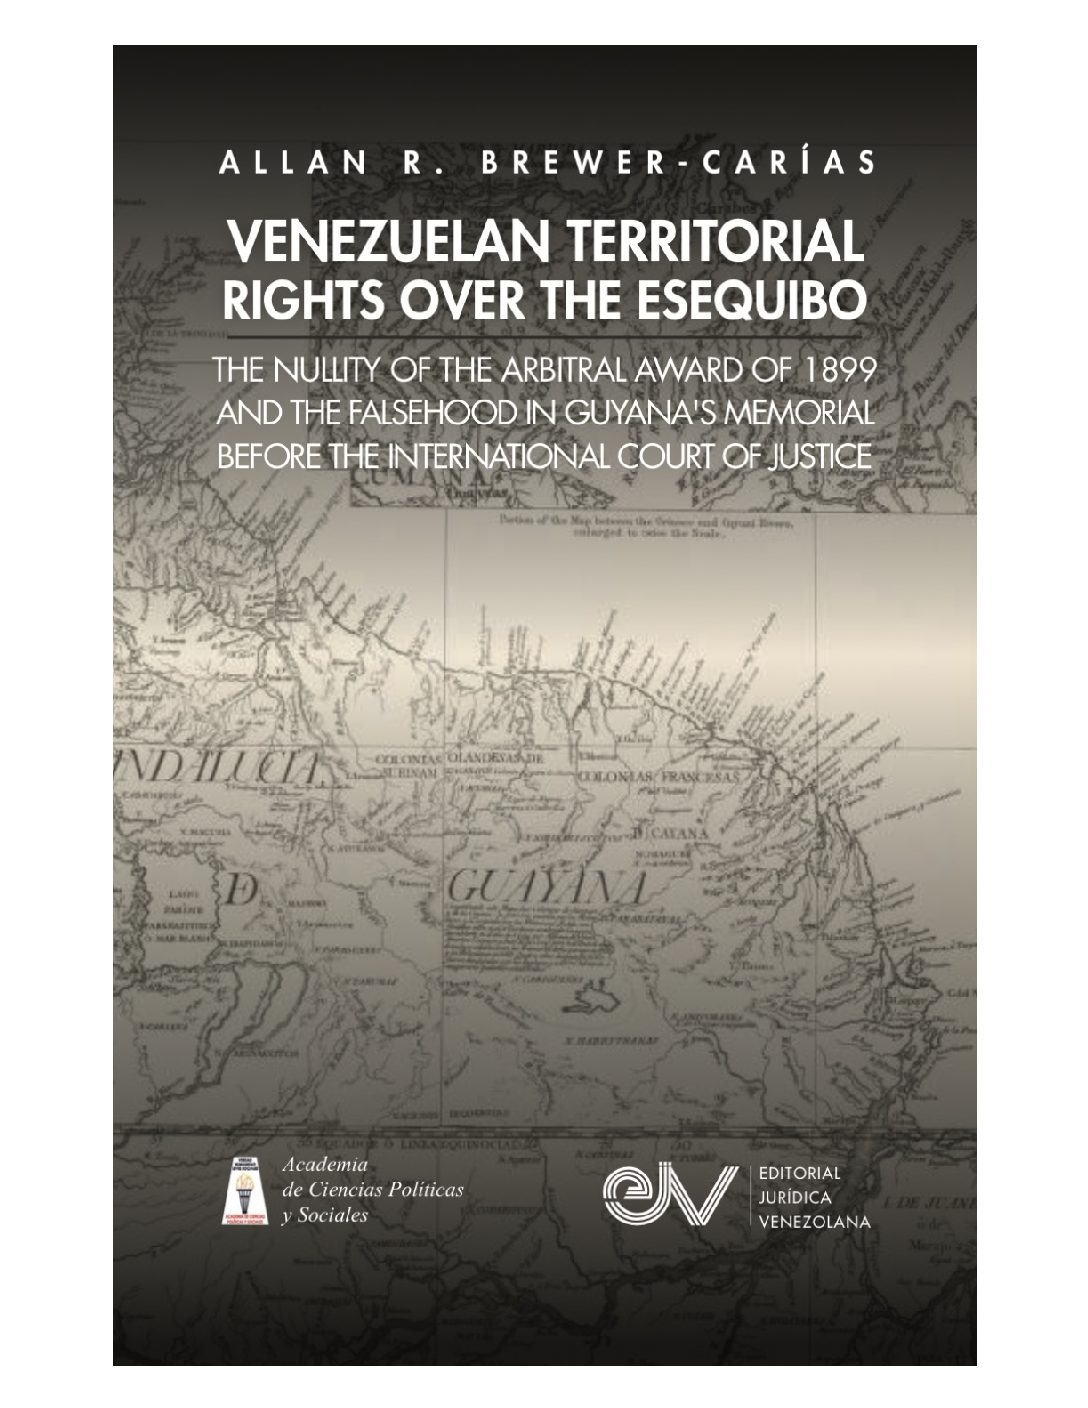 Venezuelan Territorial rights over the Esequibo, the nullity of the arbitral award of 1899 and the falsehood in Guyana’s memorial before the International Court of Justice. Autor: Allan R. Brewer-Carías